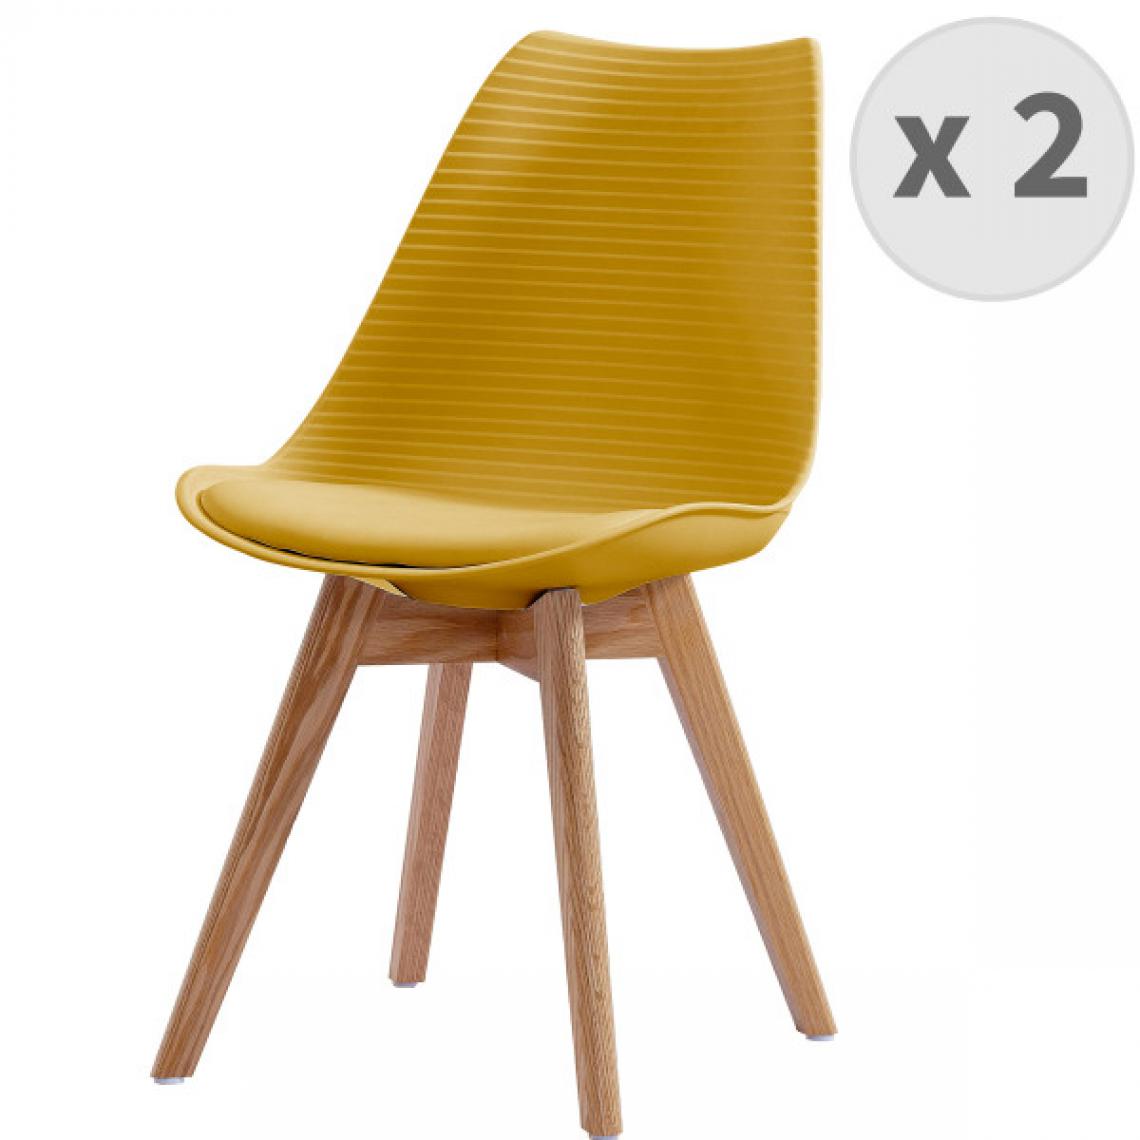 Moloo - BESSY-Chaise scandinave curry pieds chêne (x2) - Chaises